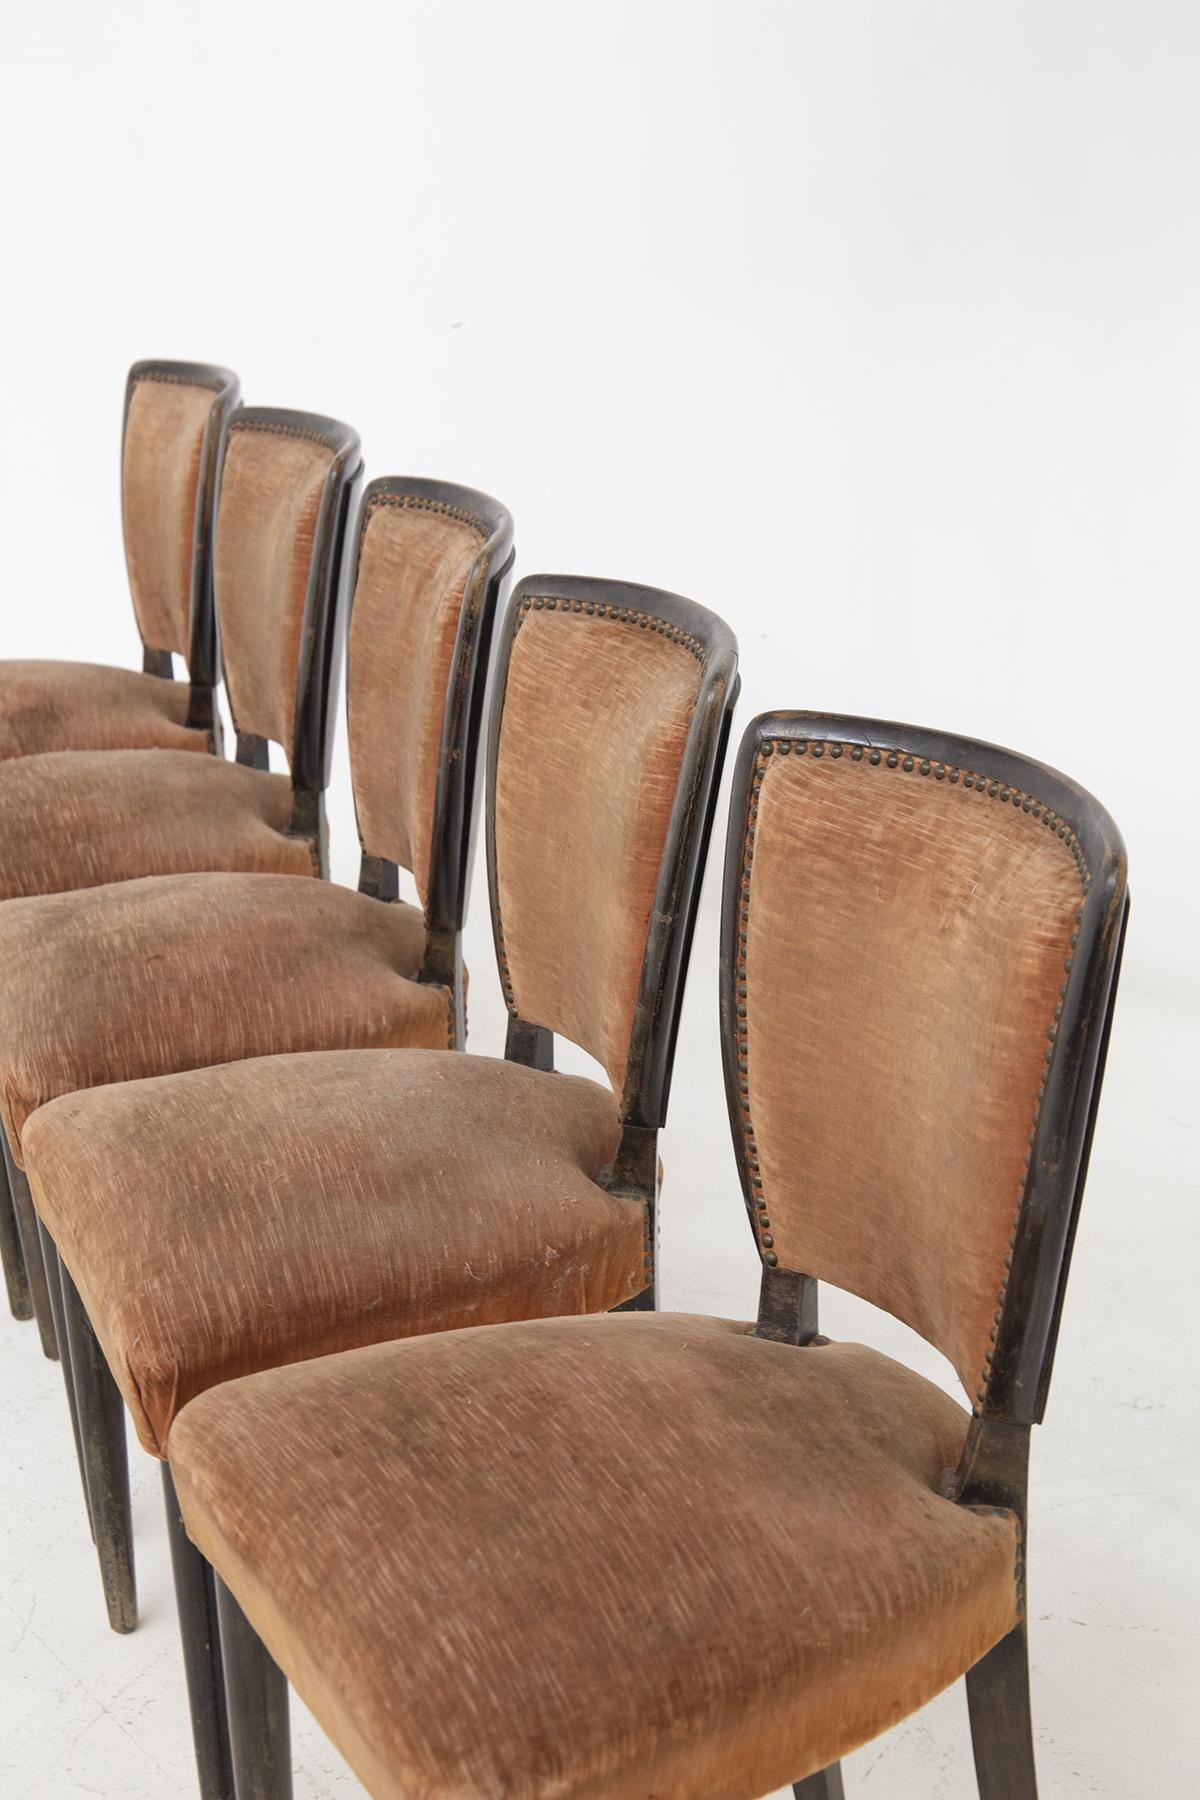 Splendid set of chairs consisting of six wooden chairs from the 1960s, of fine Italian manufacture. The chairs are by Melchiorre Bega.
The chairs have a wooden frame, with 4 legs, the front two are straight cylindrical, the back two have curved